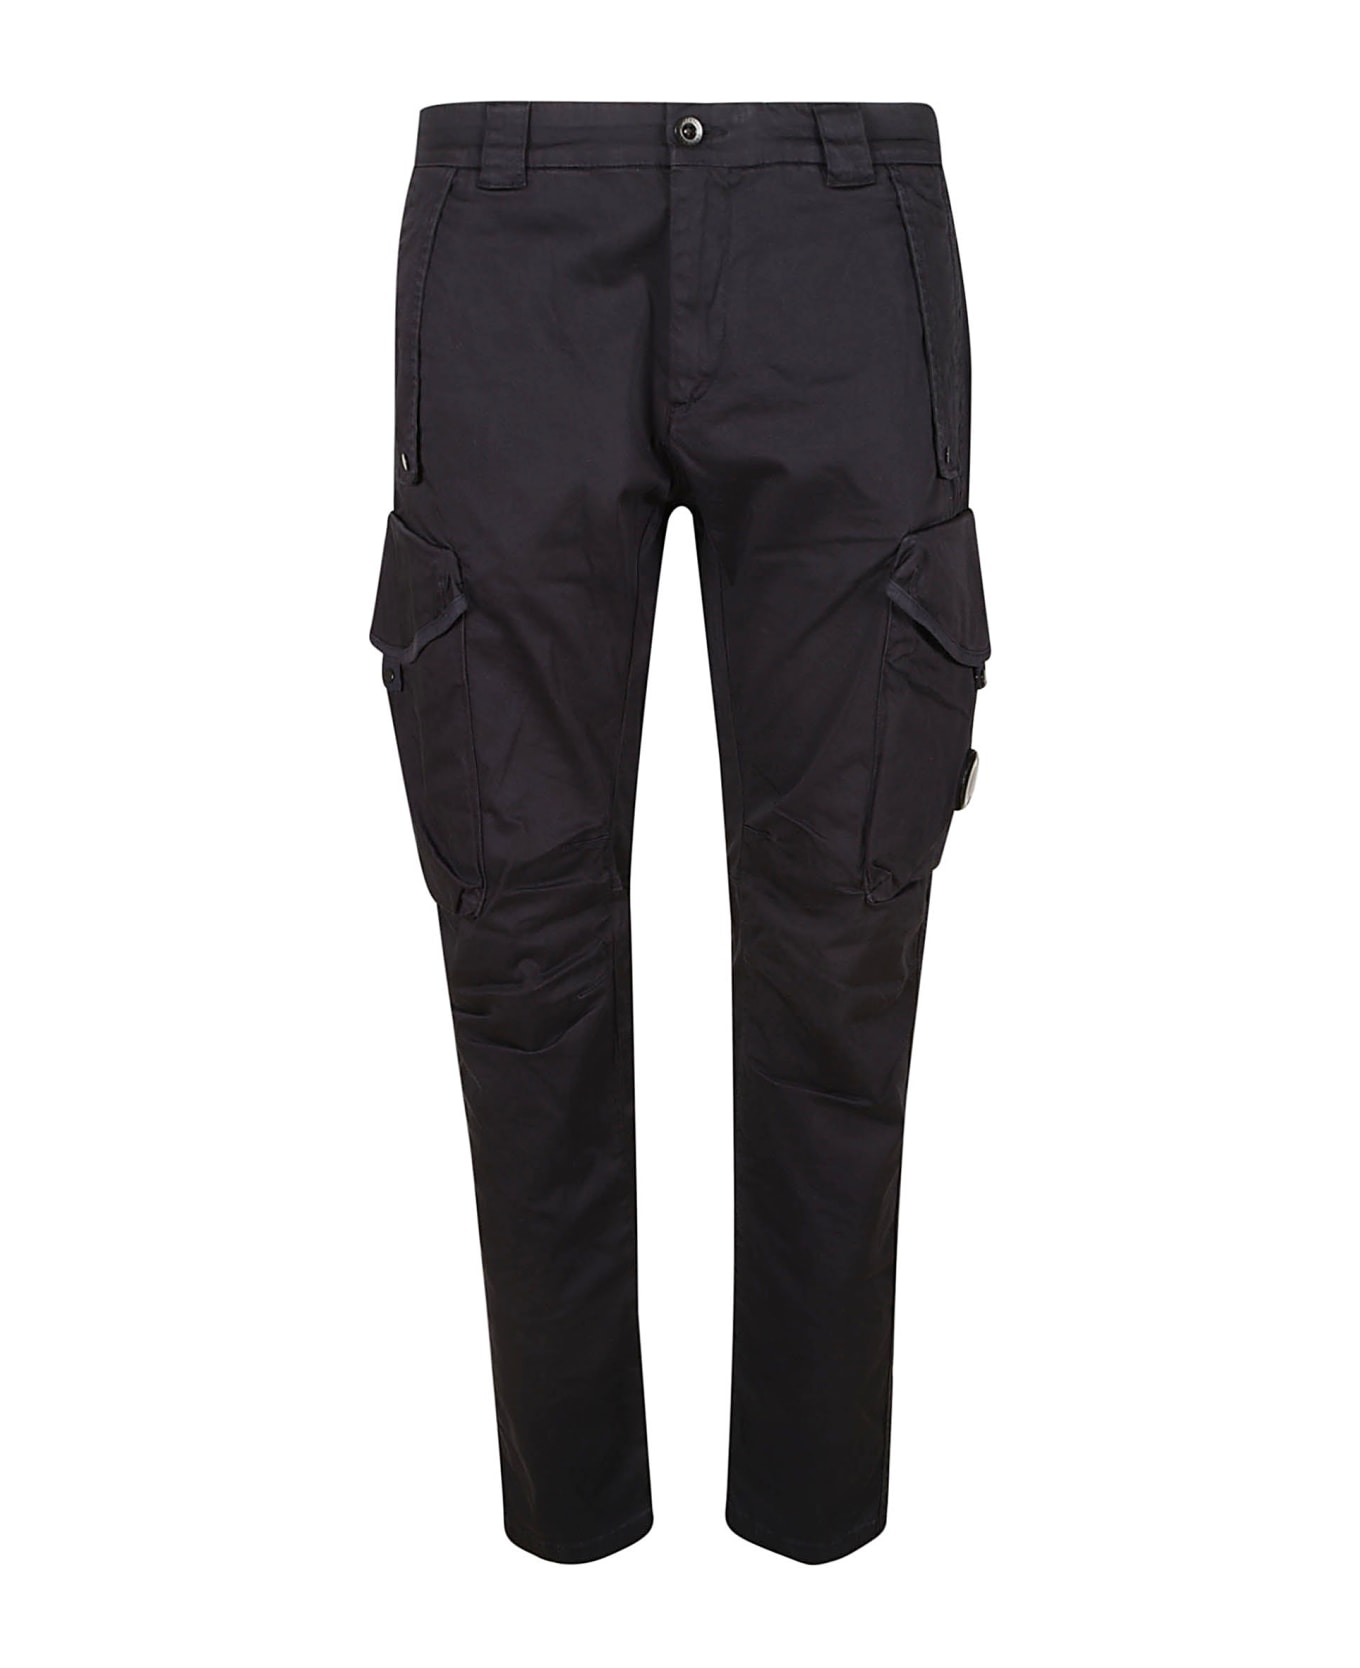 C.P. Company Cargo Buttoned Awards Trousers - TOTAL ECLIPSE